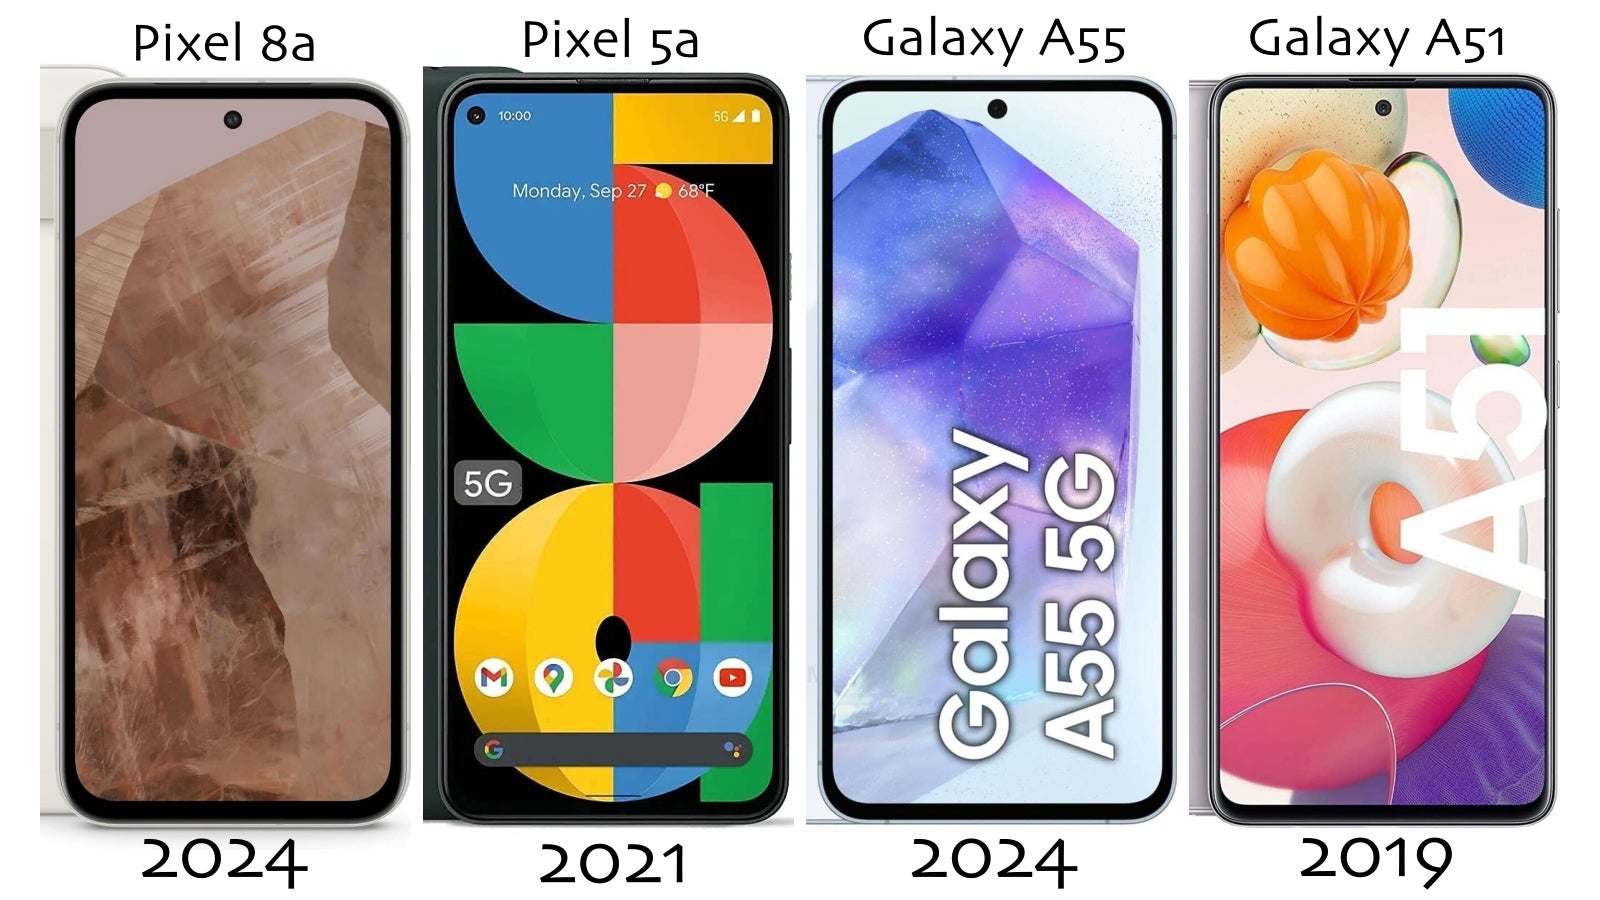 It seems like Samsung and Google continue to downgrade the design of their mid-range phones to make their flagships look better. - Not a good look! Google, Samsung make new phones look older on purpose to sell more flagships?